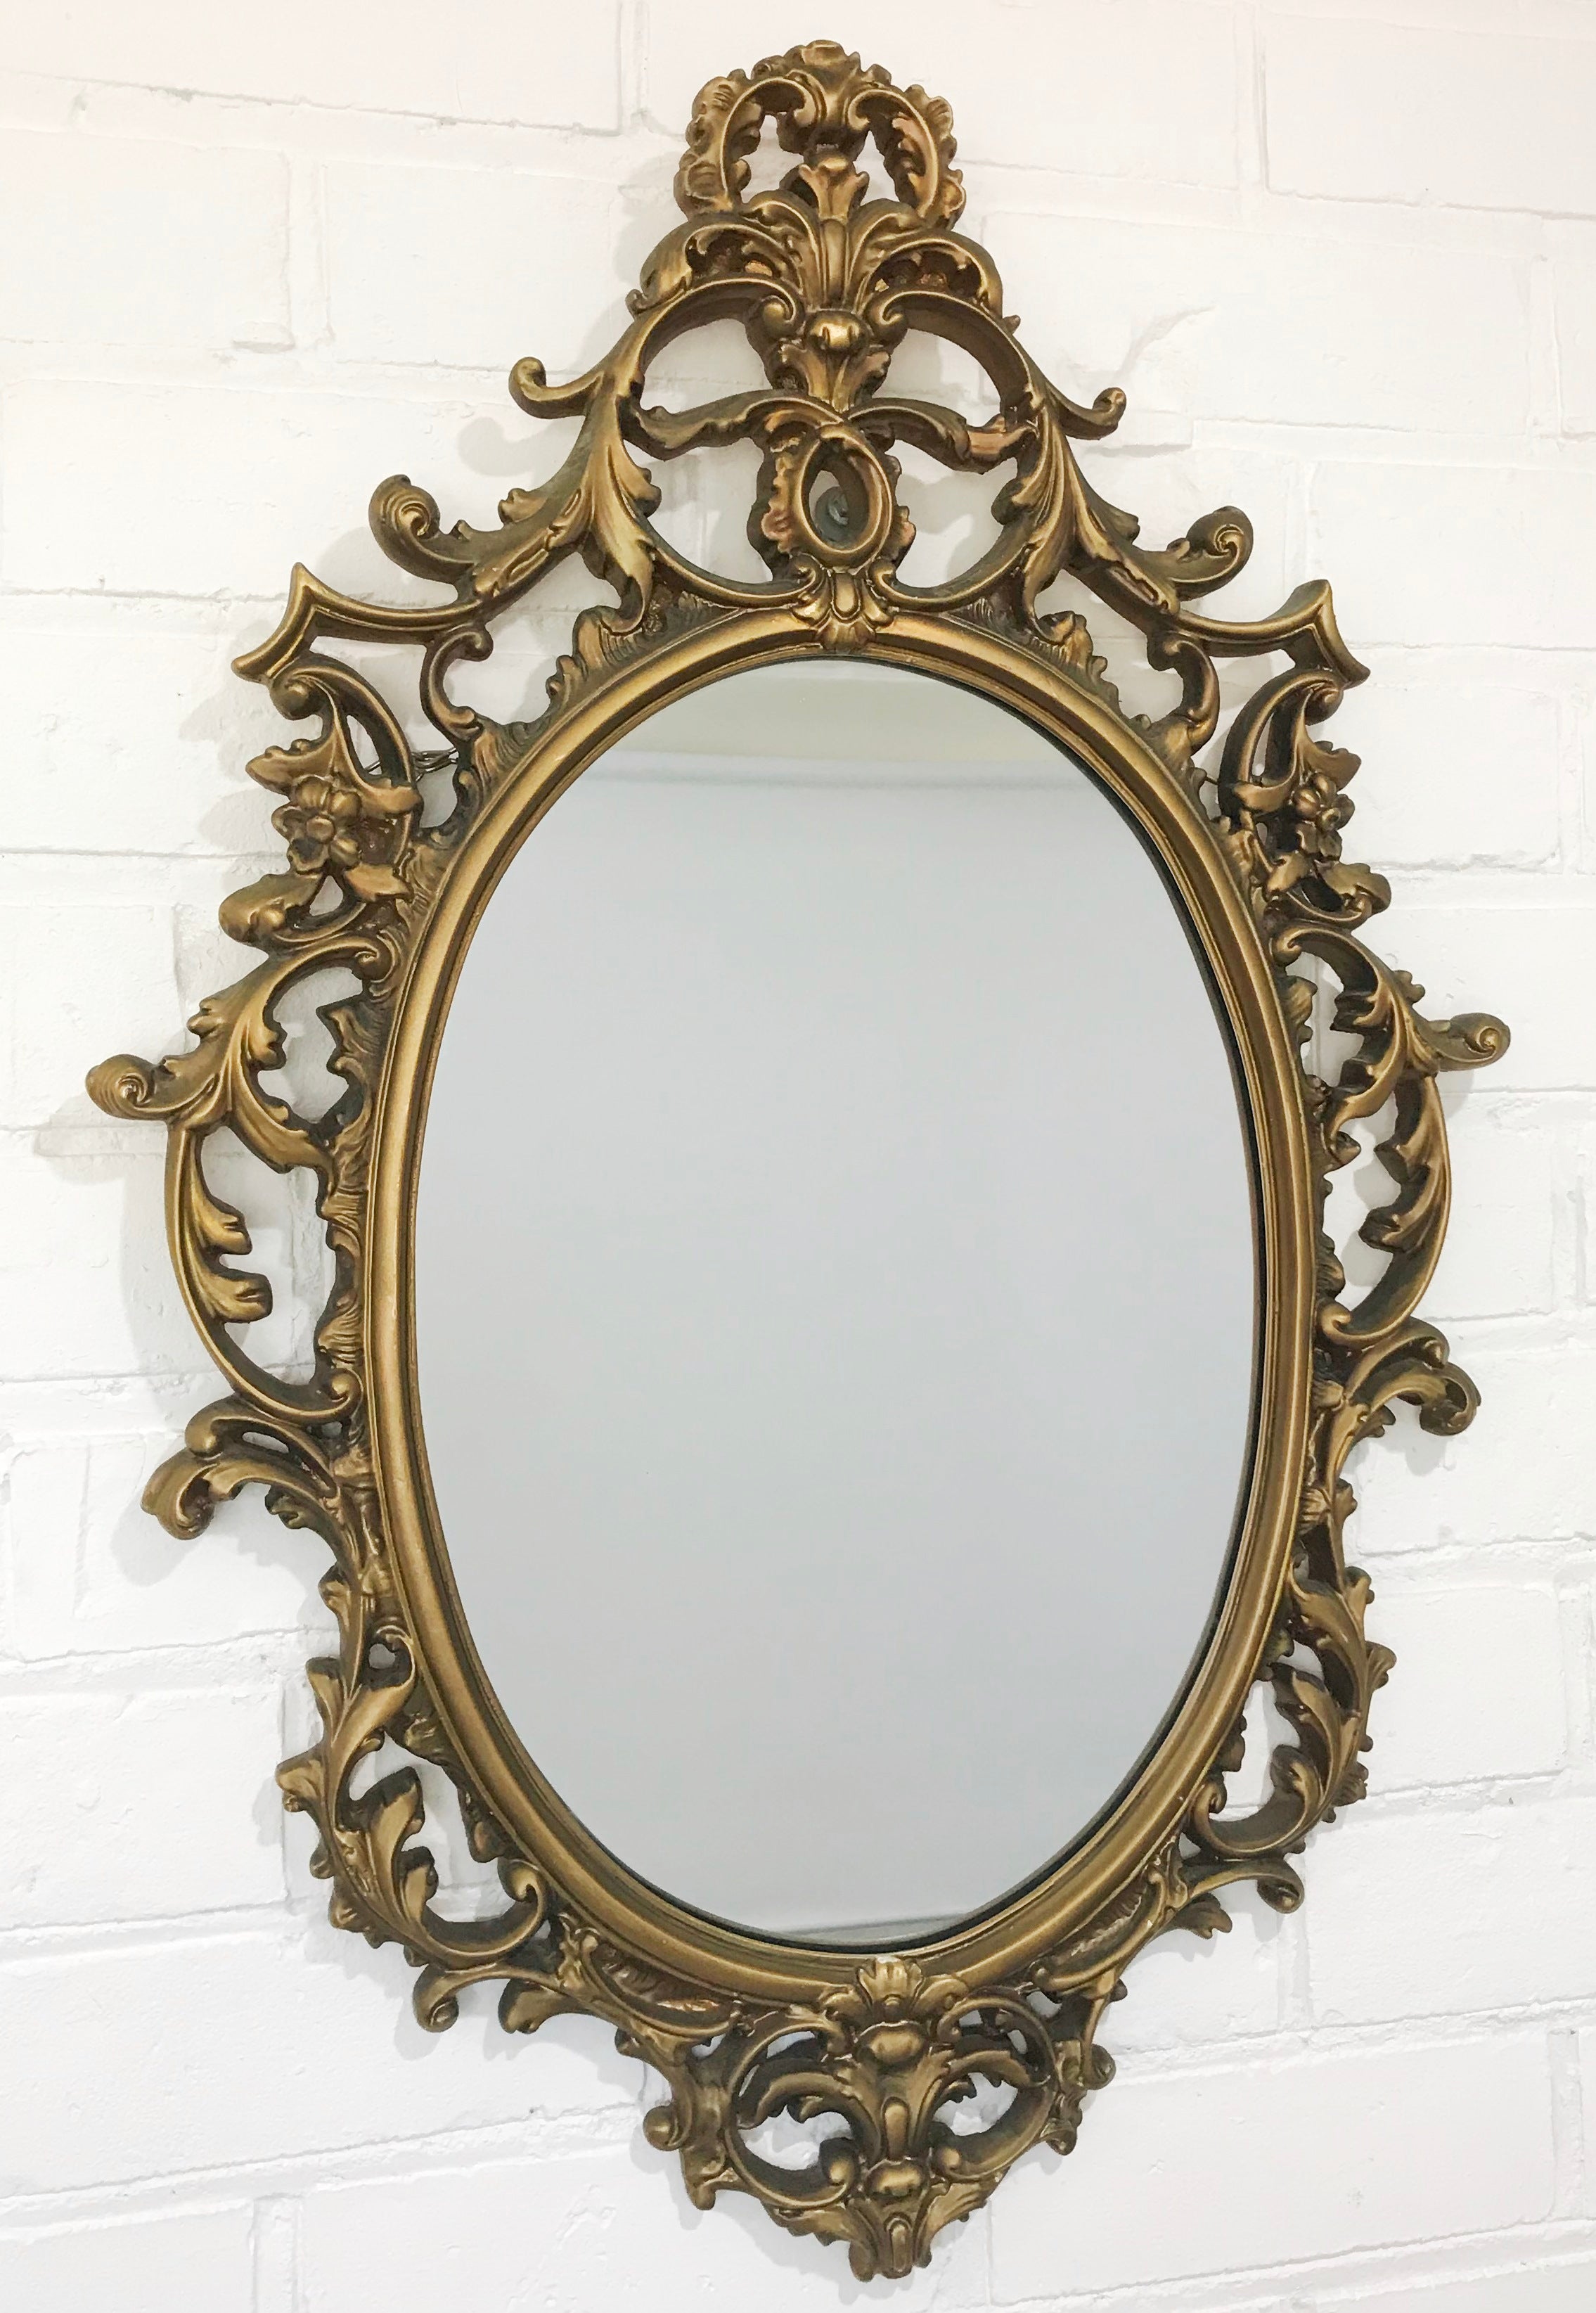 Vintage Ornate Gilt Gold Wall Mirror | eXibit collection